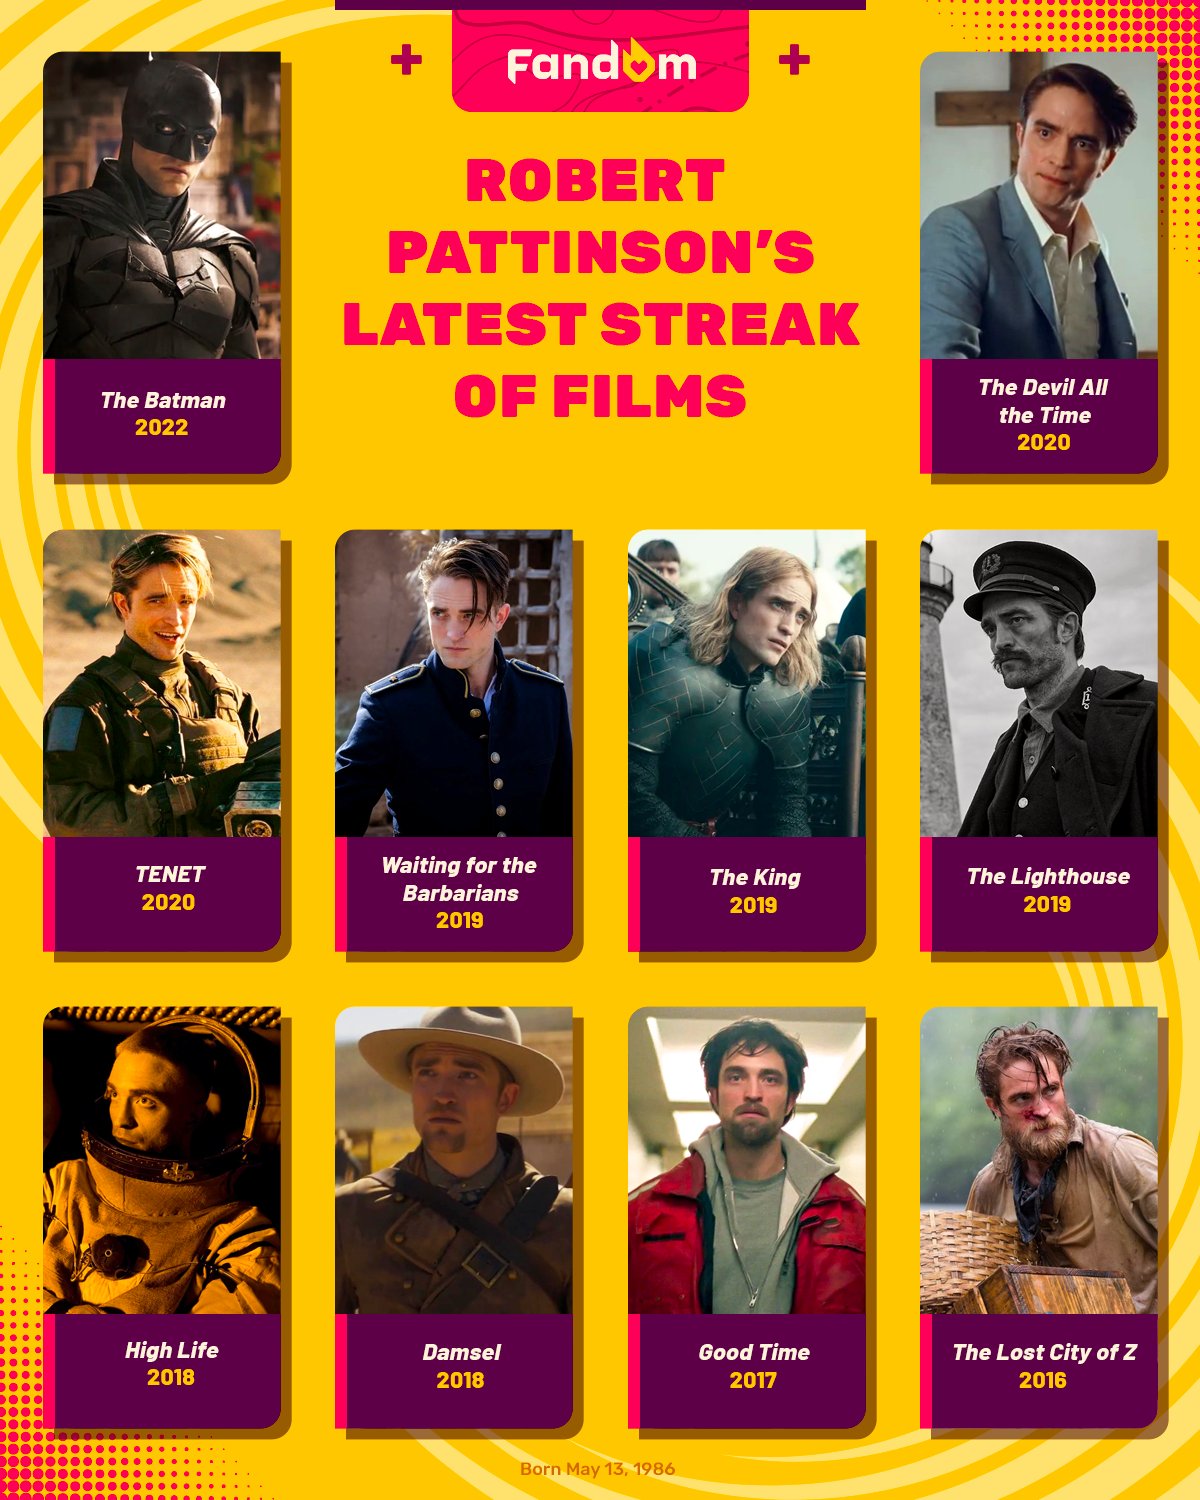 Happy Birthday Robert Pattinson How many of his last 10 films have you seen? 